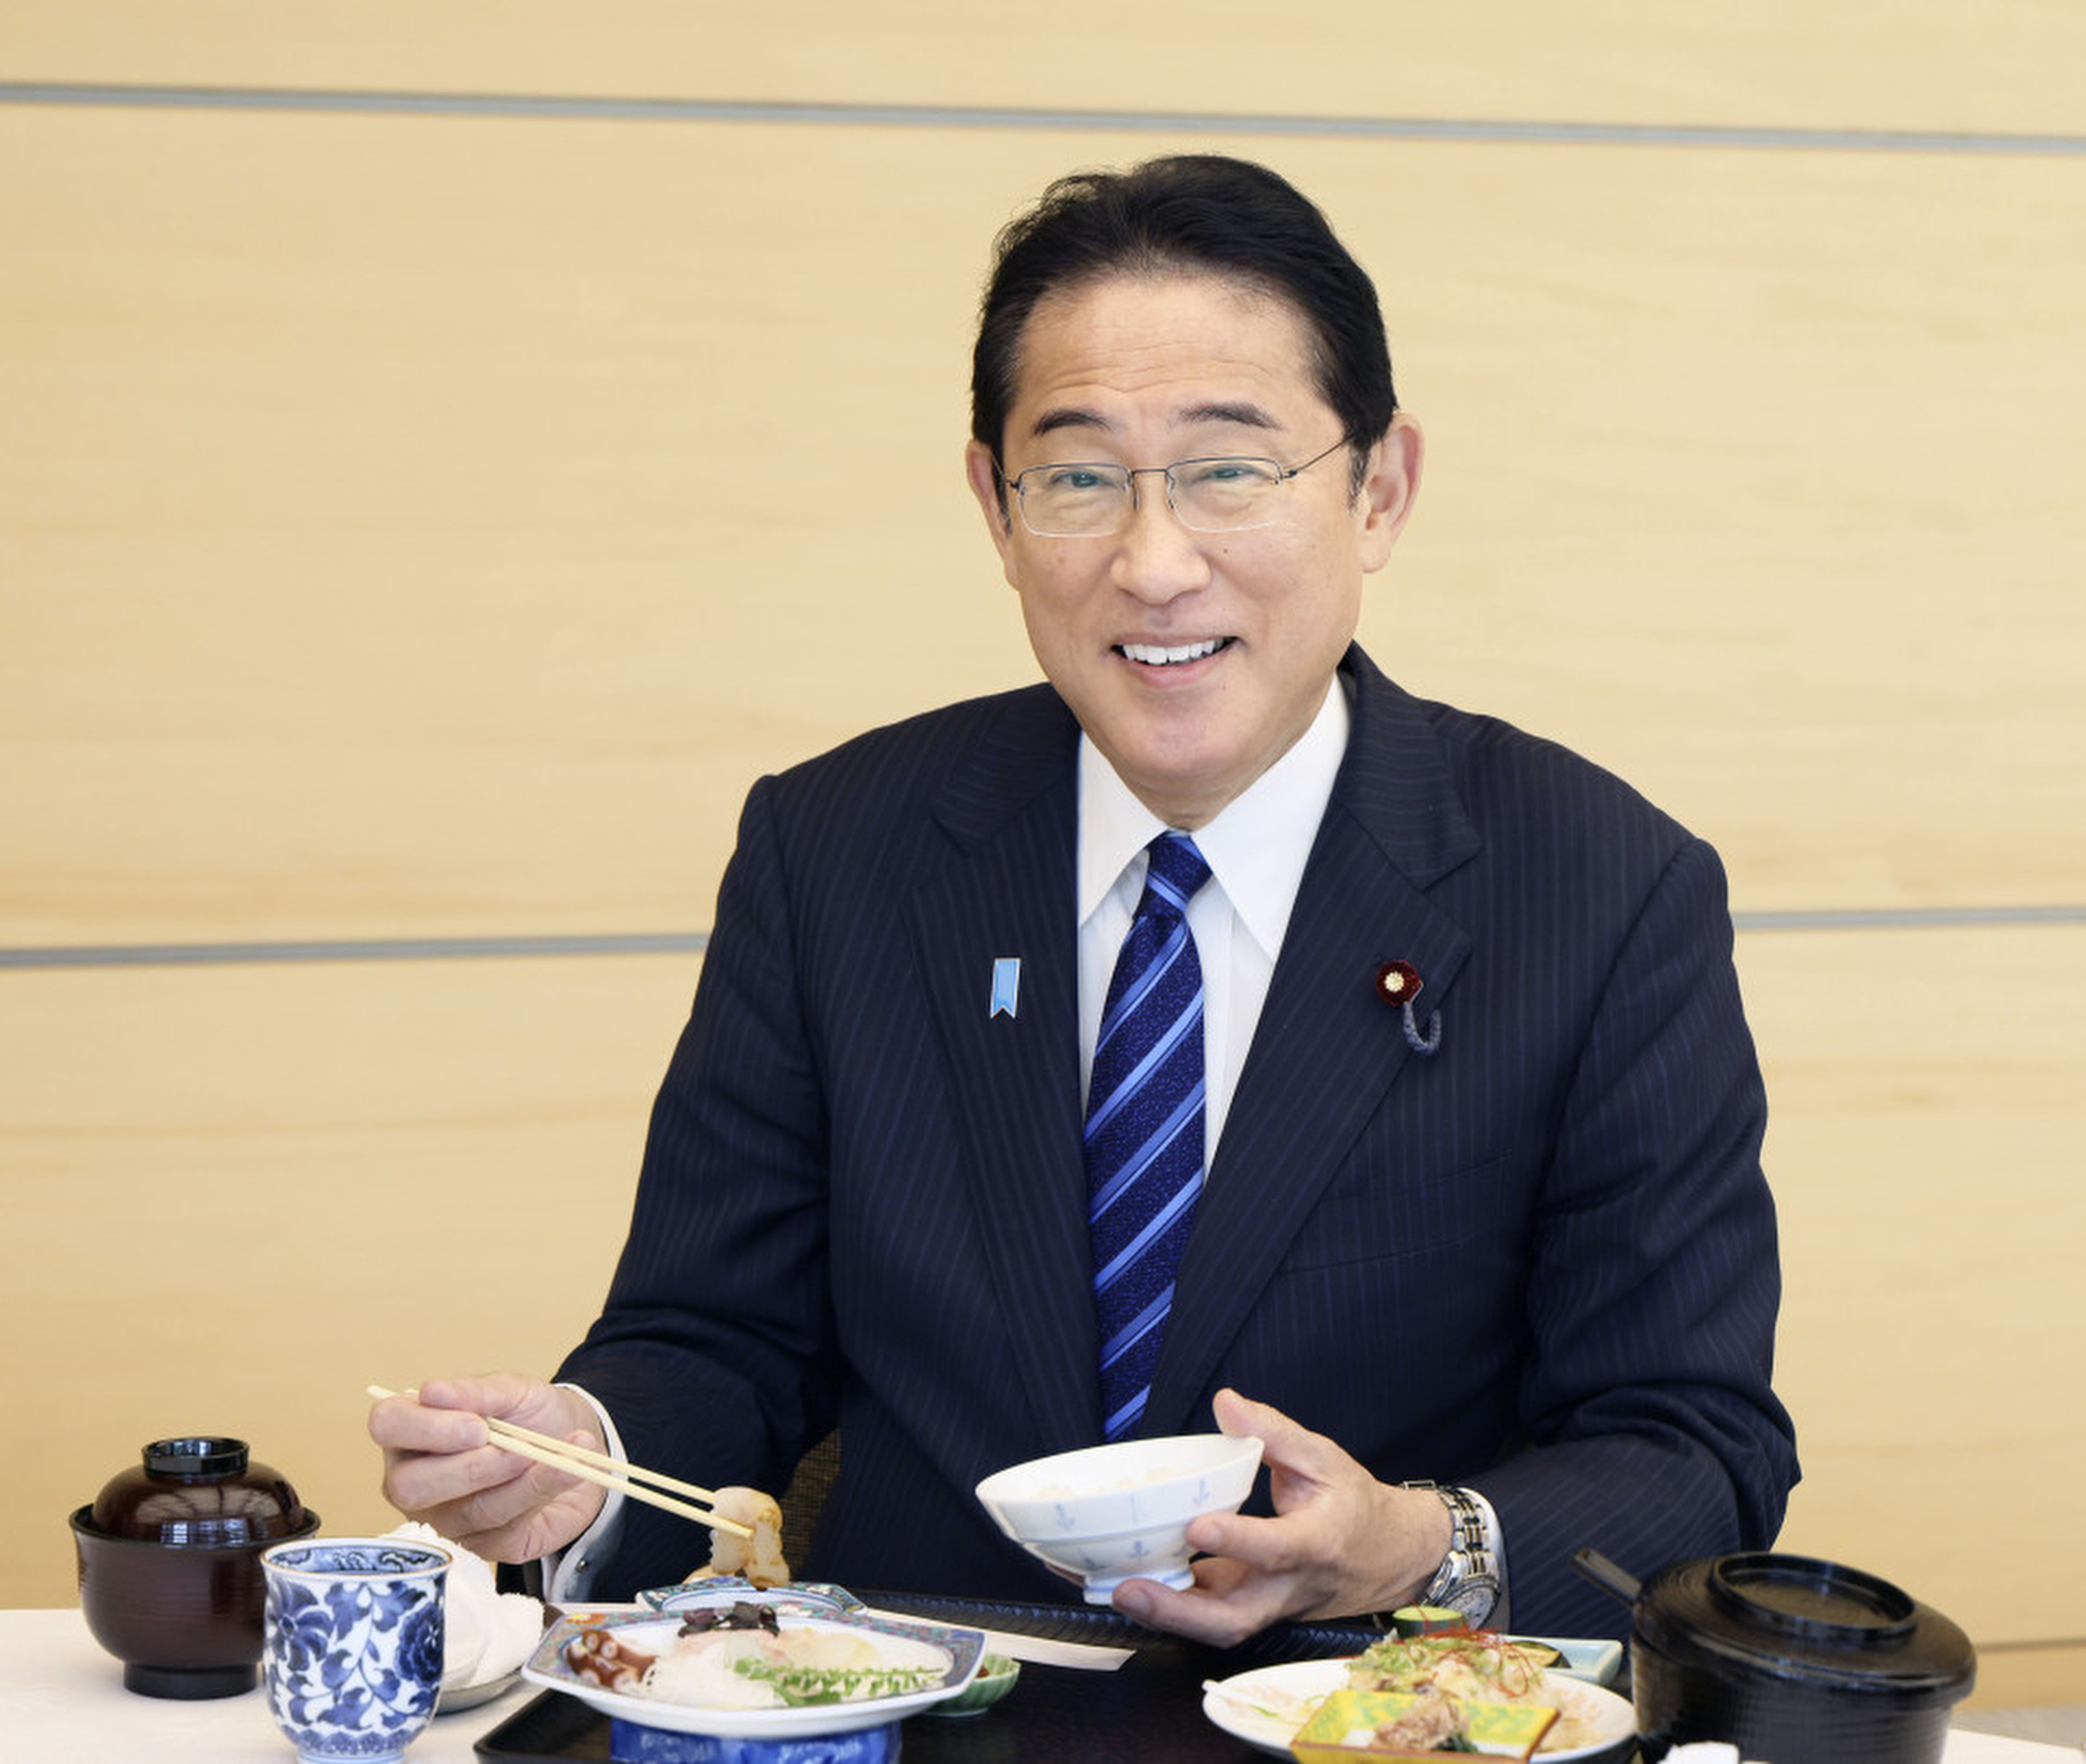 Japanese Prime Minister Fumio Kishida eats seafood sourced from the sea off Fukushima Prefecture for lunch in his office. Photo: Handout